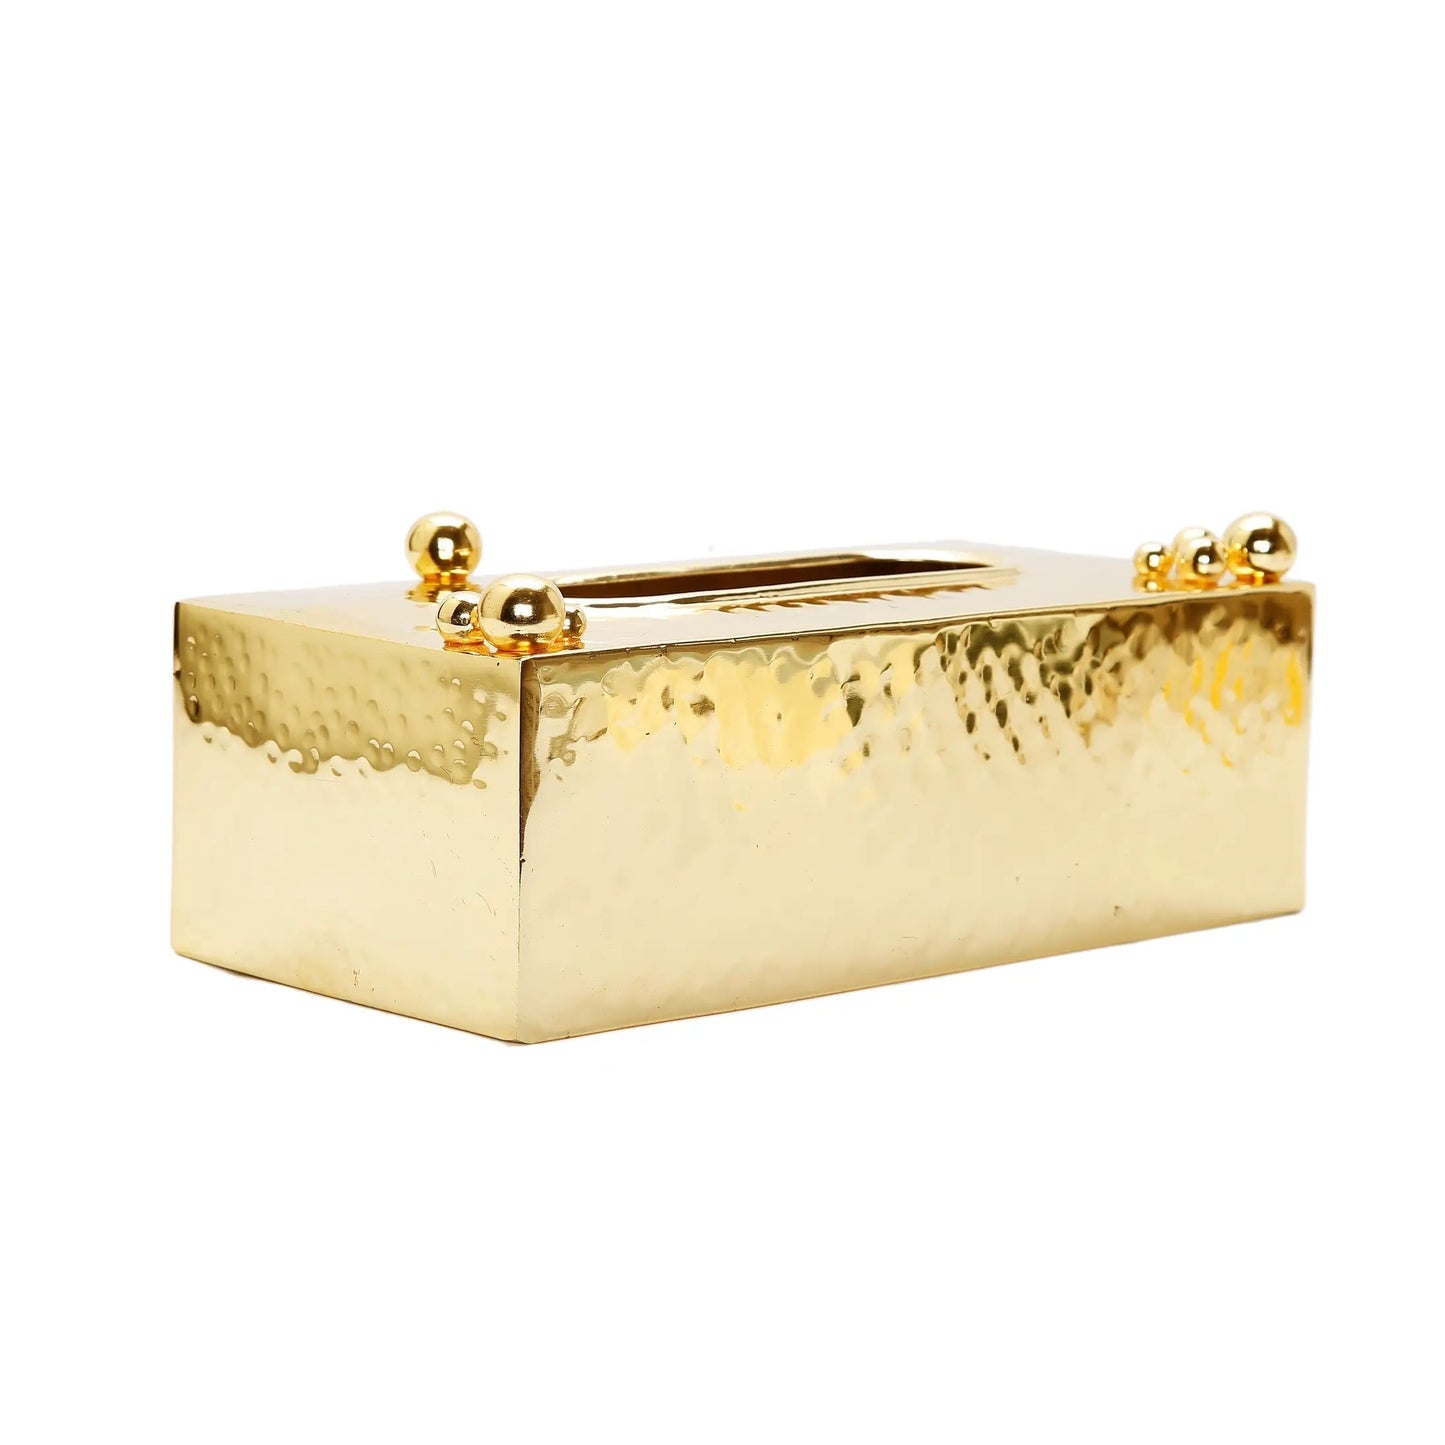 Gold Hammered Tissue Box with Ball Design Facial Tissue Holders High Class Touch - Home Decor 